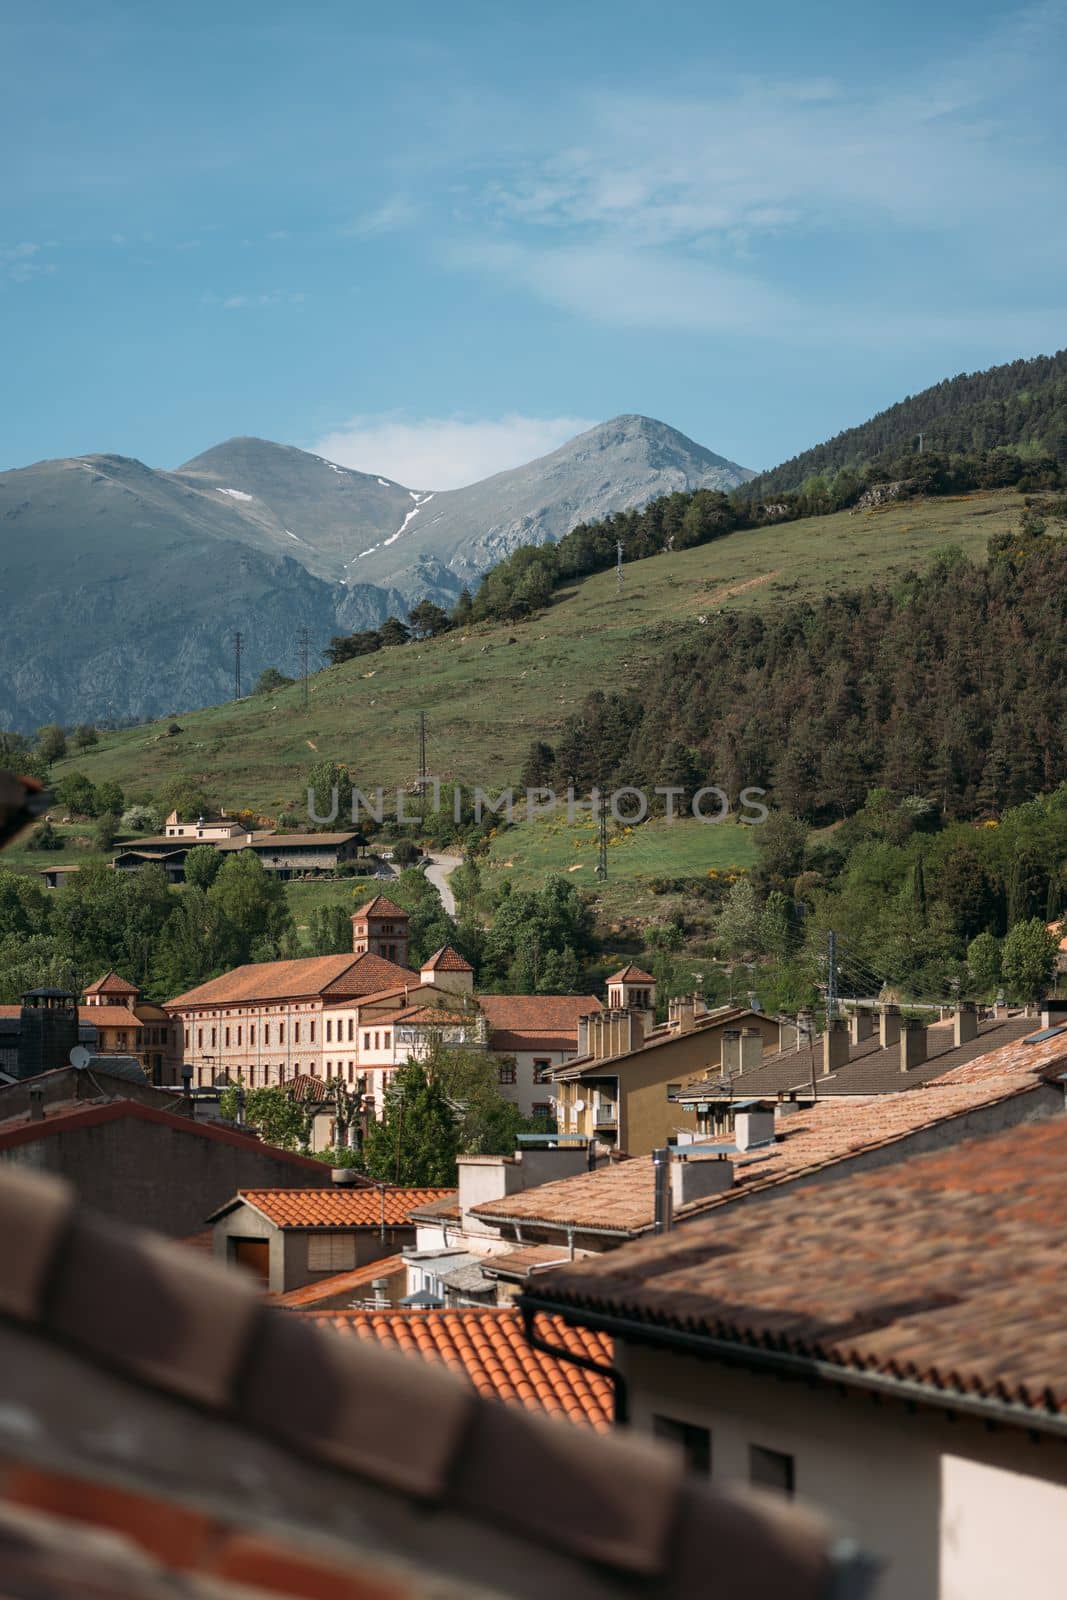 Orange roofs of modern houses in small village of Ribes de Freser at foot of Pyrenees in Spain. Sunlight illuminates beautiful village with picturesque mountain nature and beautiful architecture. by apavlin